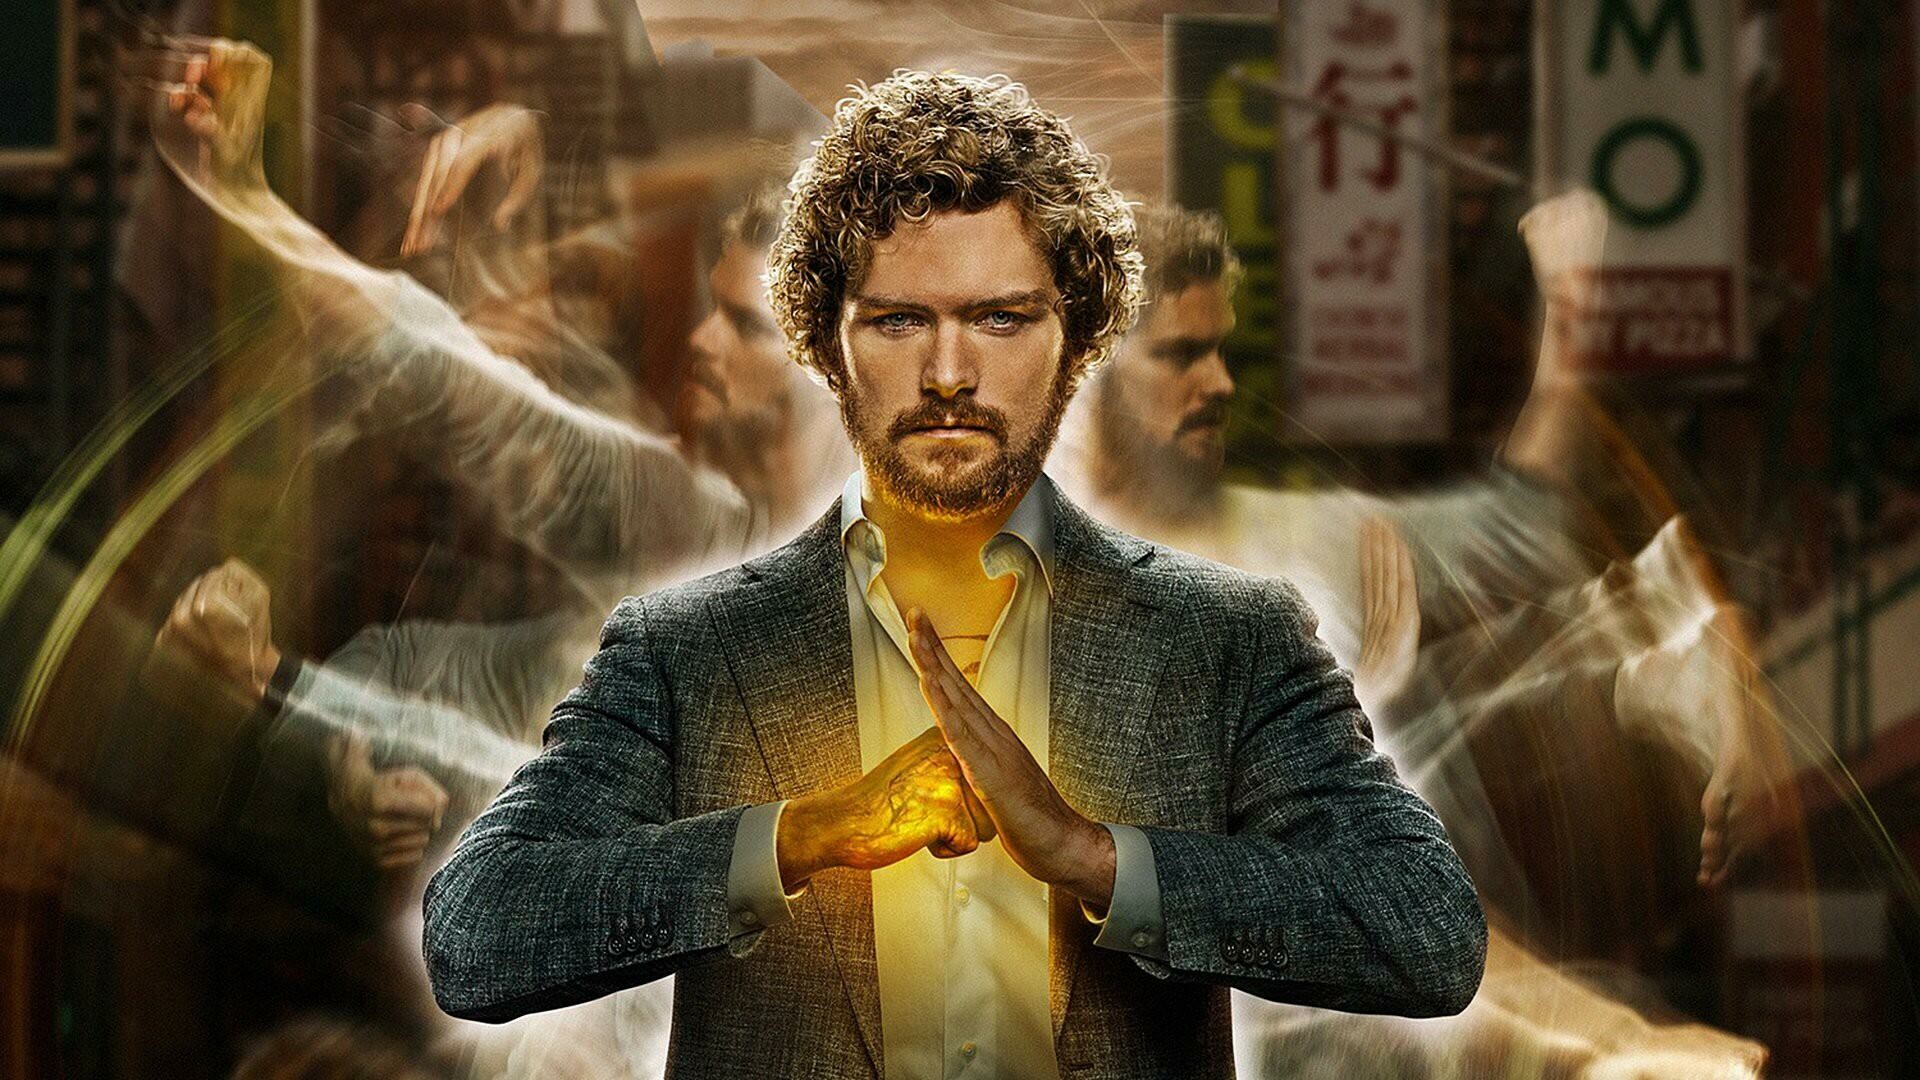 Iron Fist: The popular Marvel hero, who can focus mass amounts of energy into his fist, giving him the ability to superhumanly punch anything and anyone he desires. 1920x1080 Full HD Background.